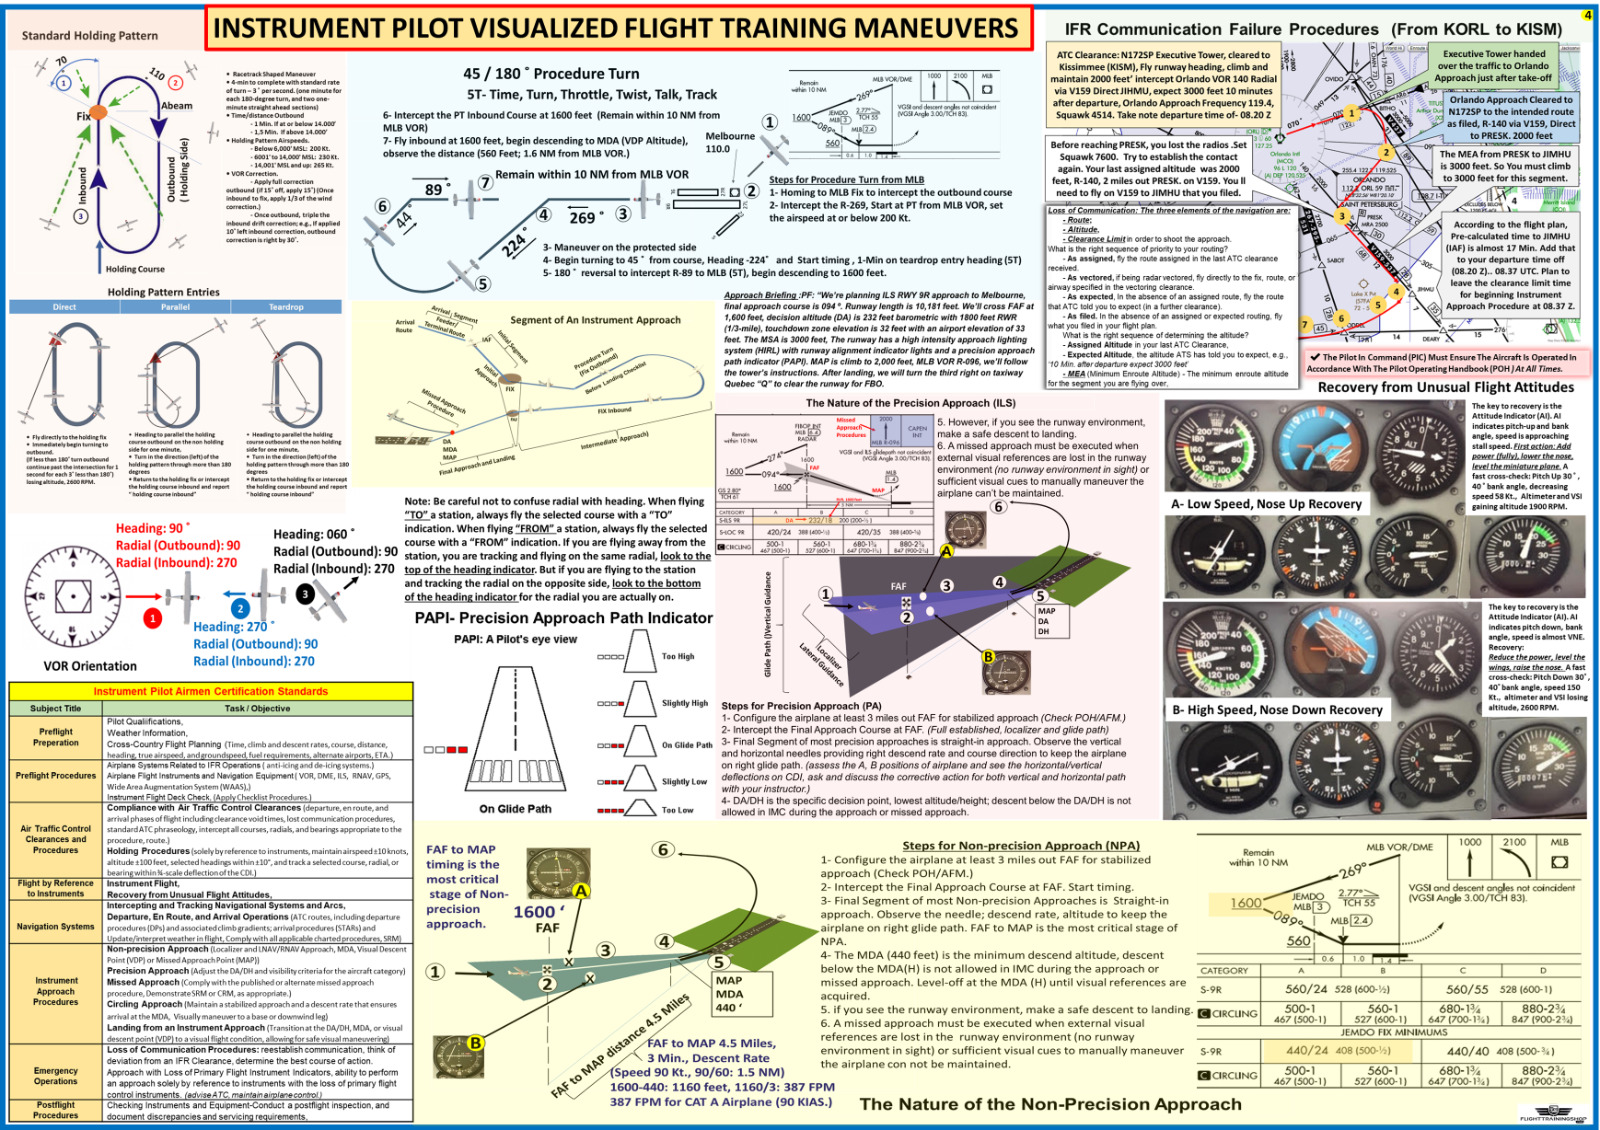 Instrument Pilot Visualized Flight Training Maneuvers, Poster, ALL IN ONE